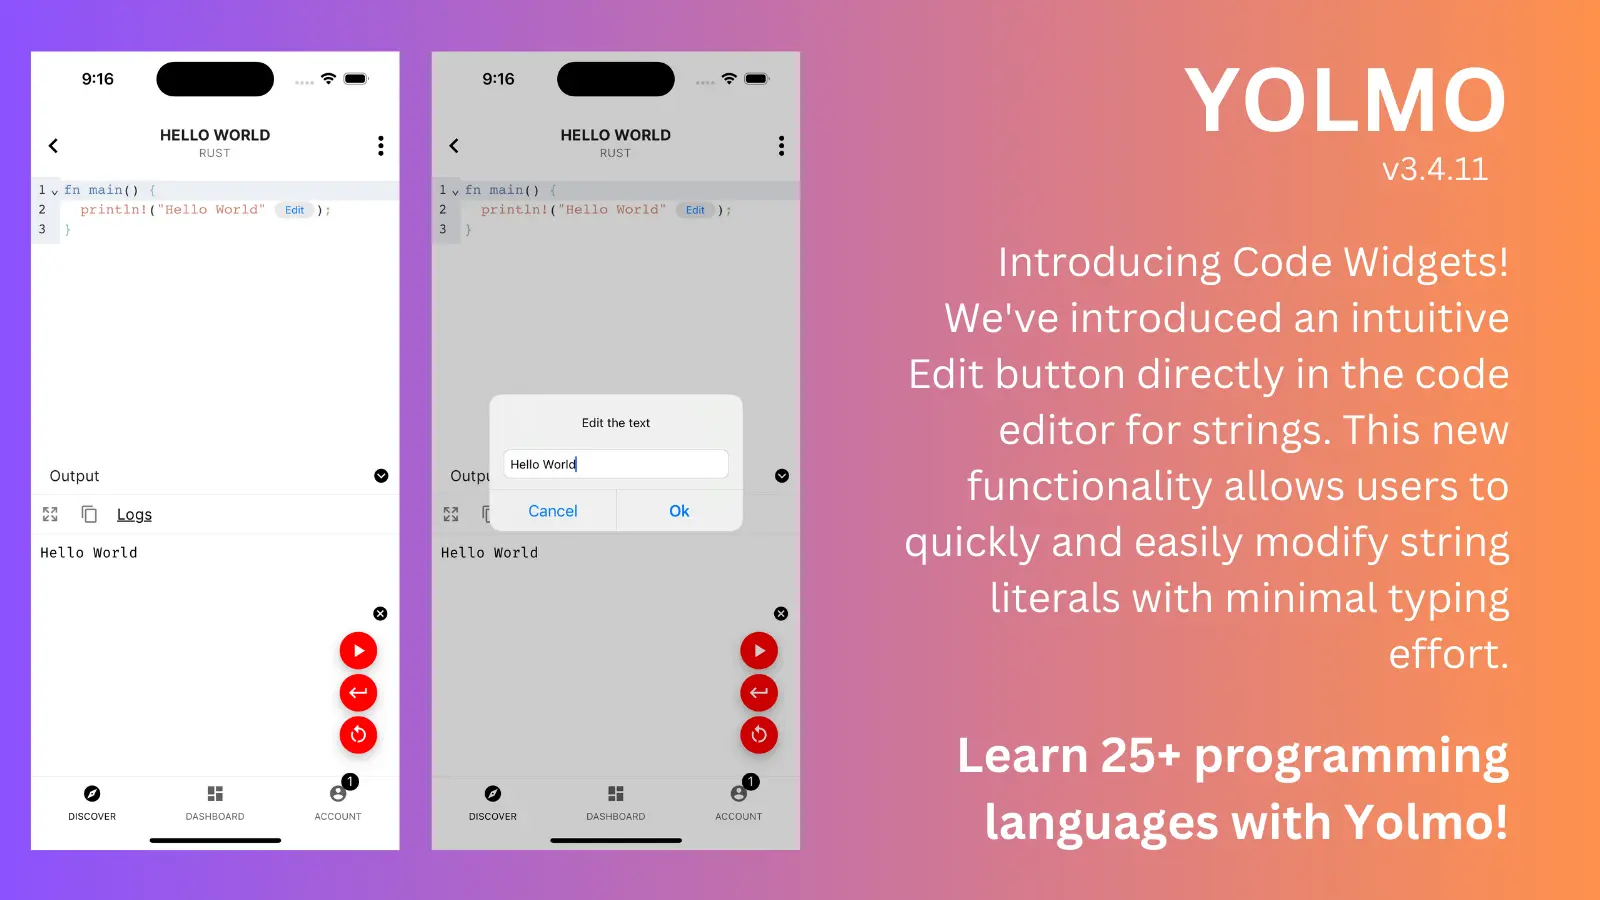 We're excited to announce the latest feature in Yolmo 3.4.11 - Code Widgets! Enhancing your coding experience, we've introduced an intuitive Edit button directly in the code editor for strings. This new functionality allows users to quickly and easily modify string literals with minimal typing effort.